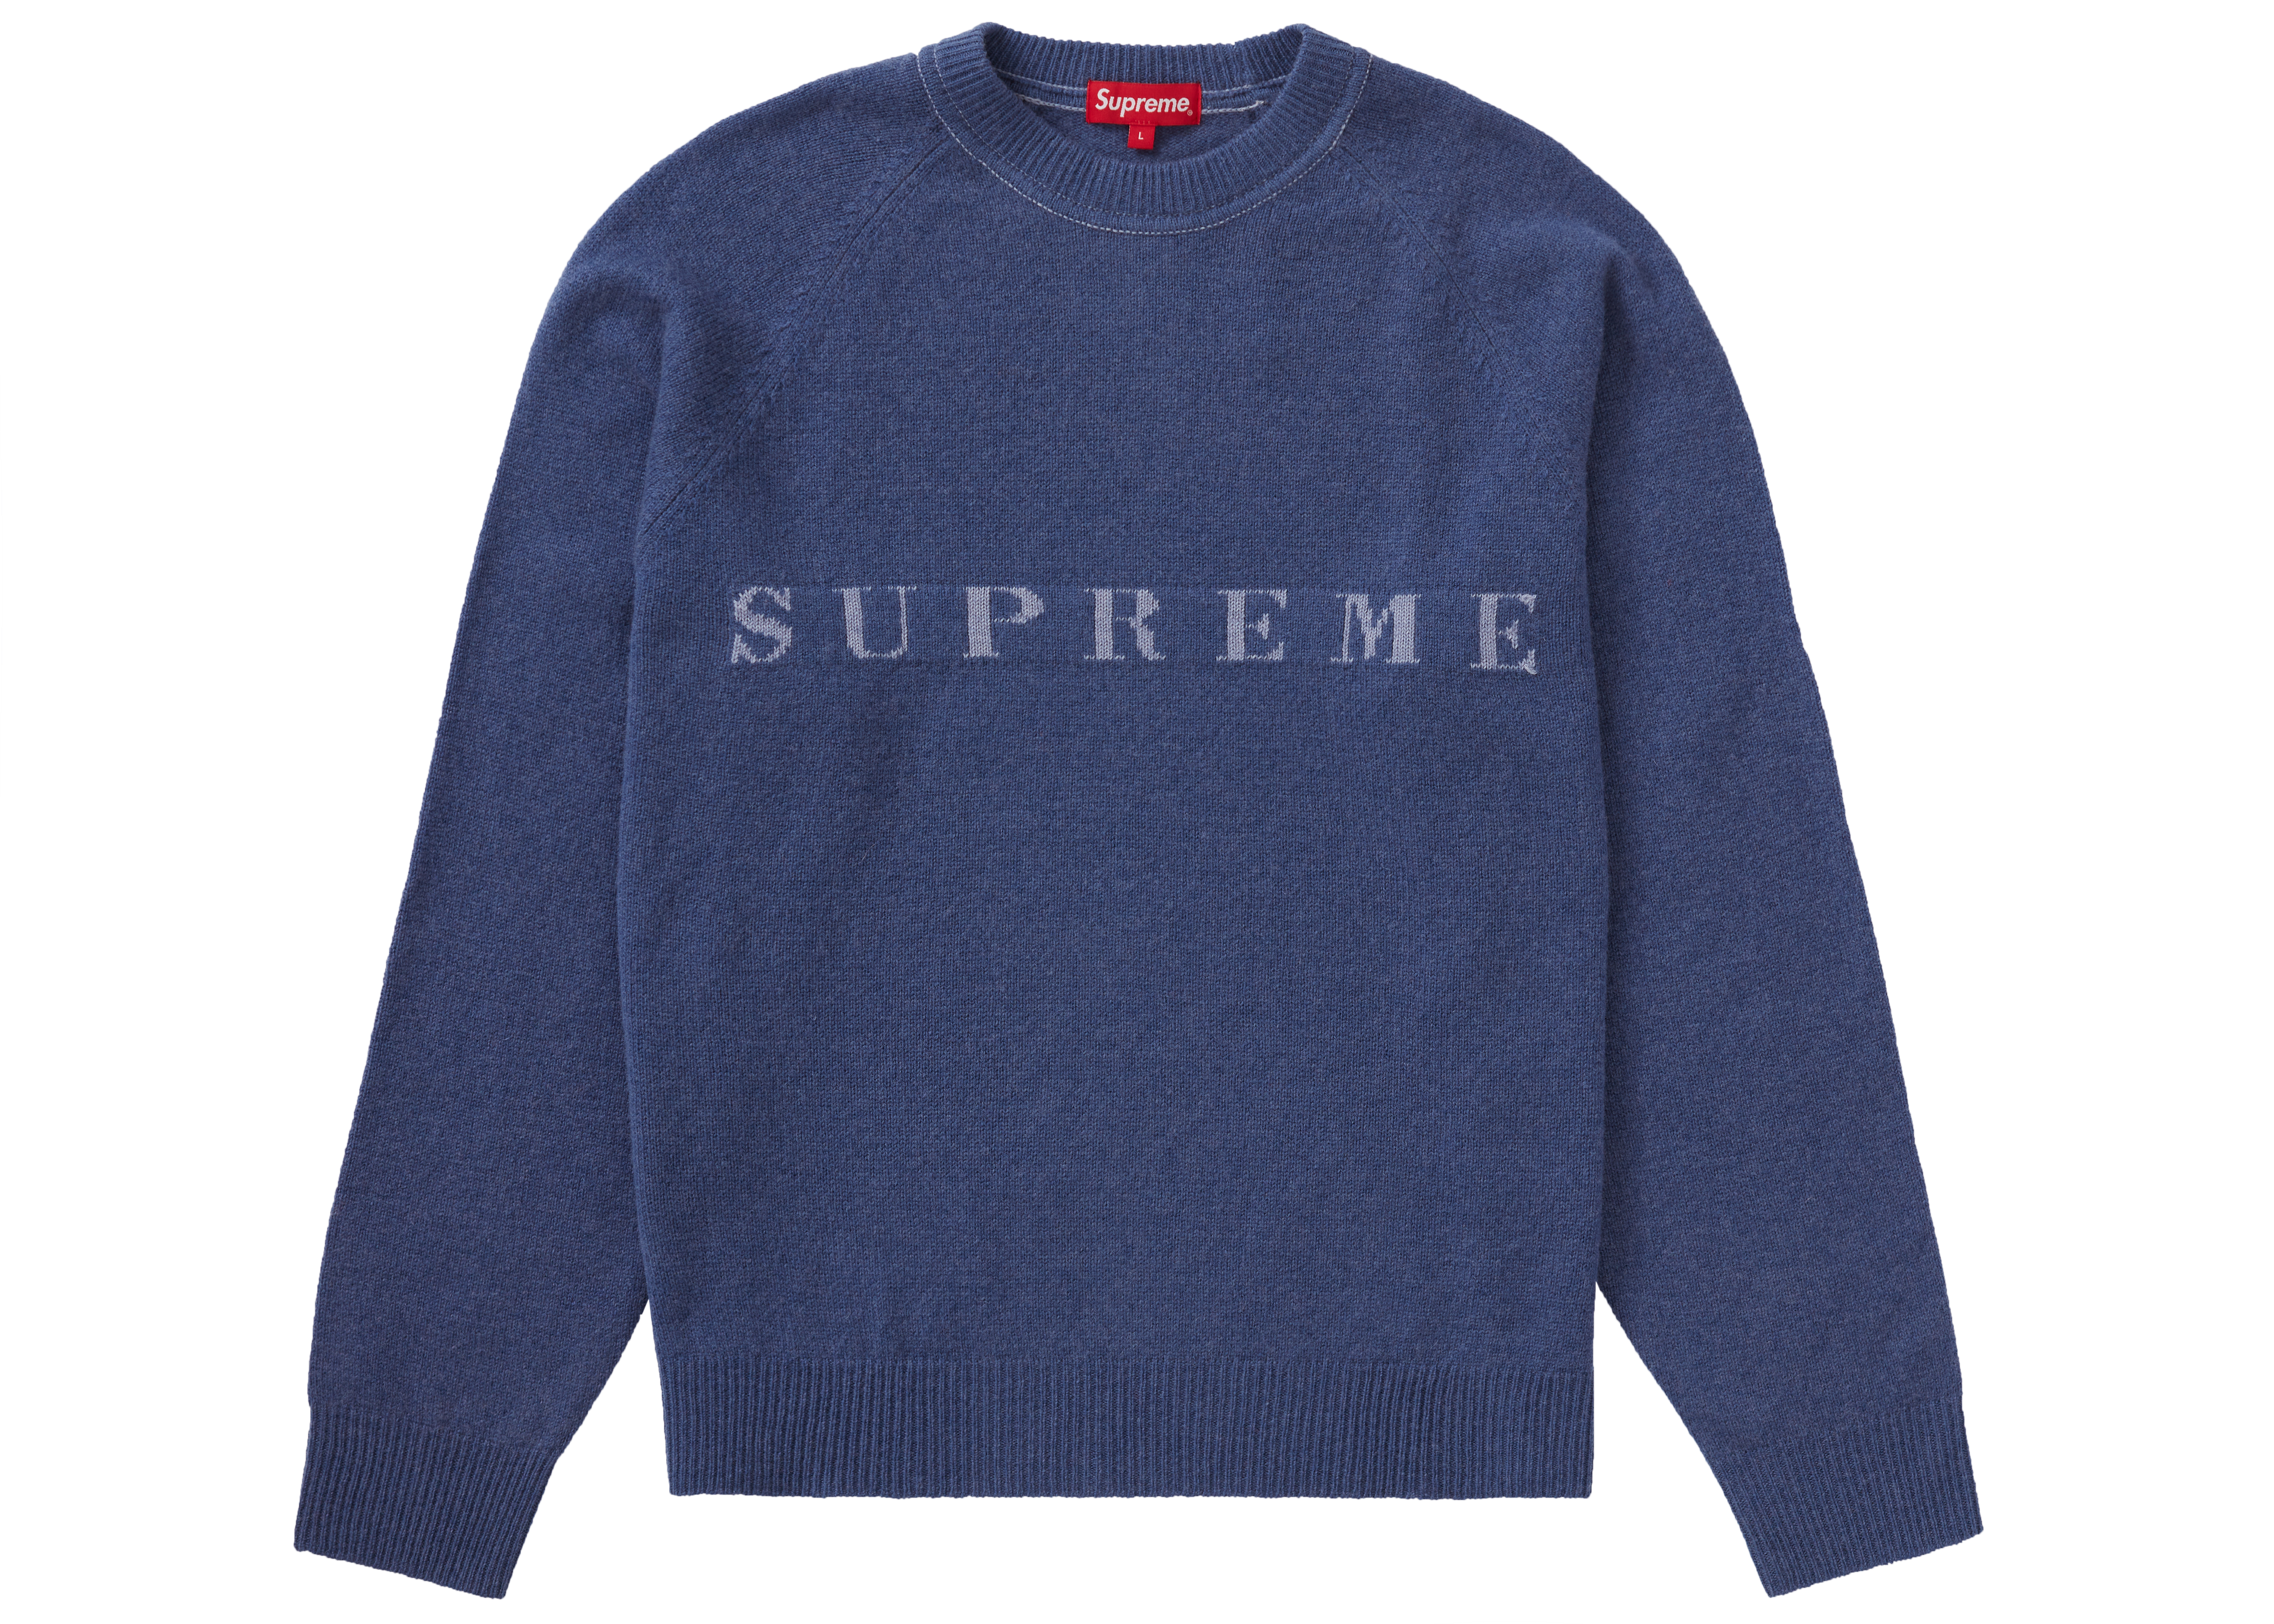 Supreme Stone Washed Sweater Navy Men's - FW20 - US